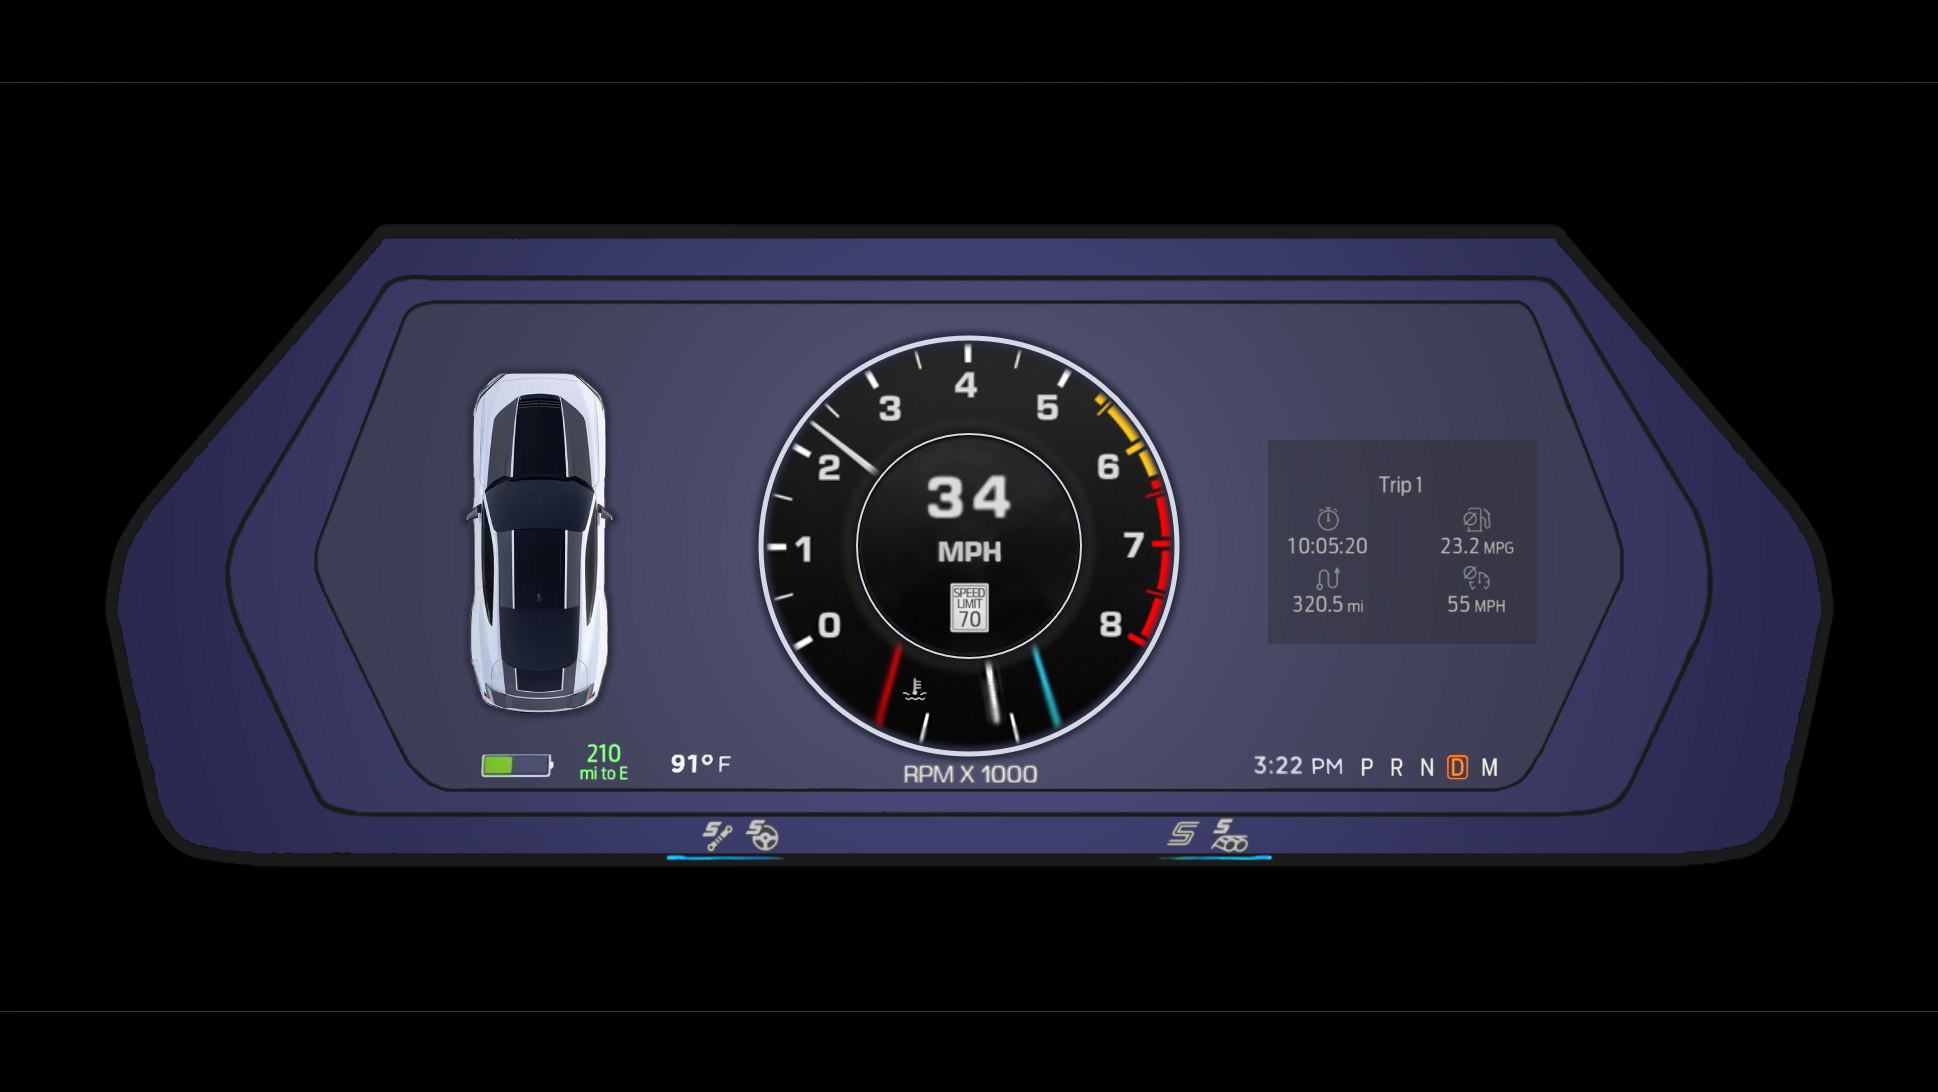 S650 Mustang What if there were more Classic Gauge Clusters? 2013 Tesla Model S